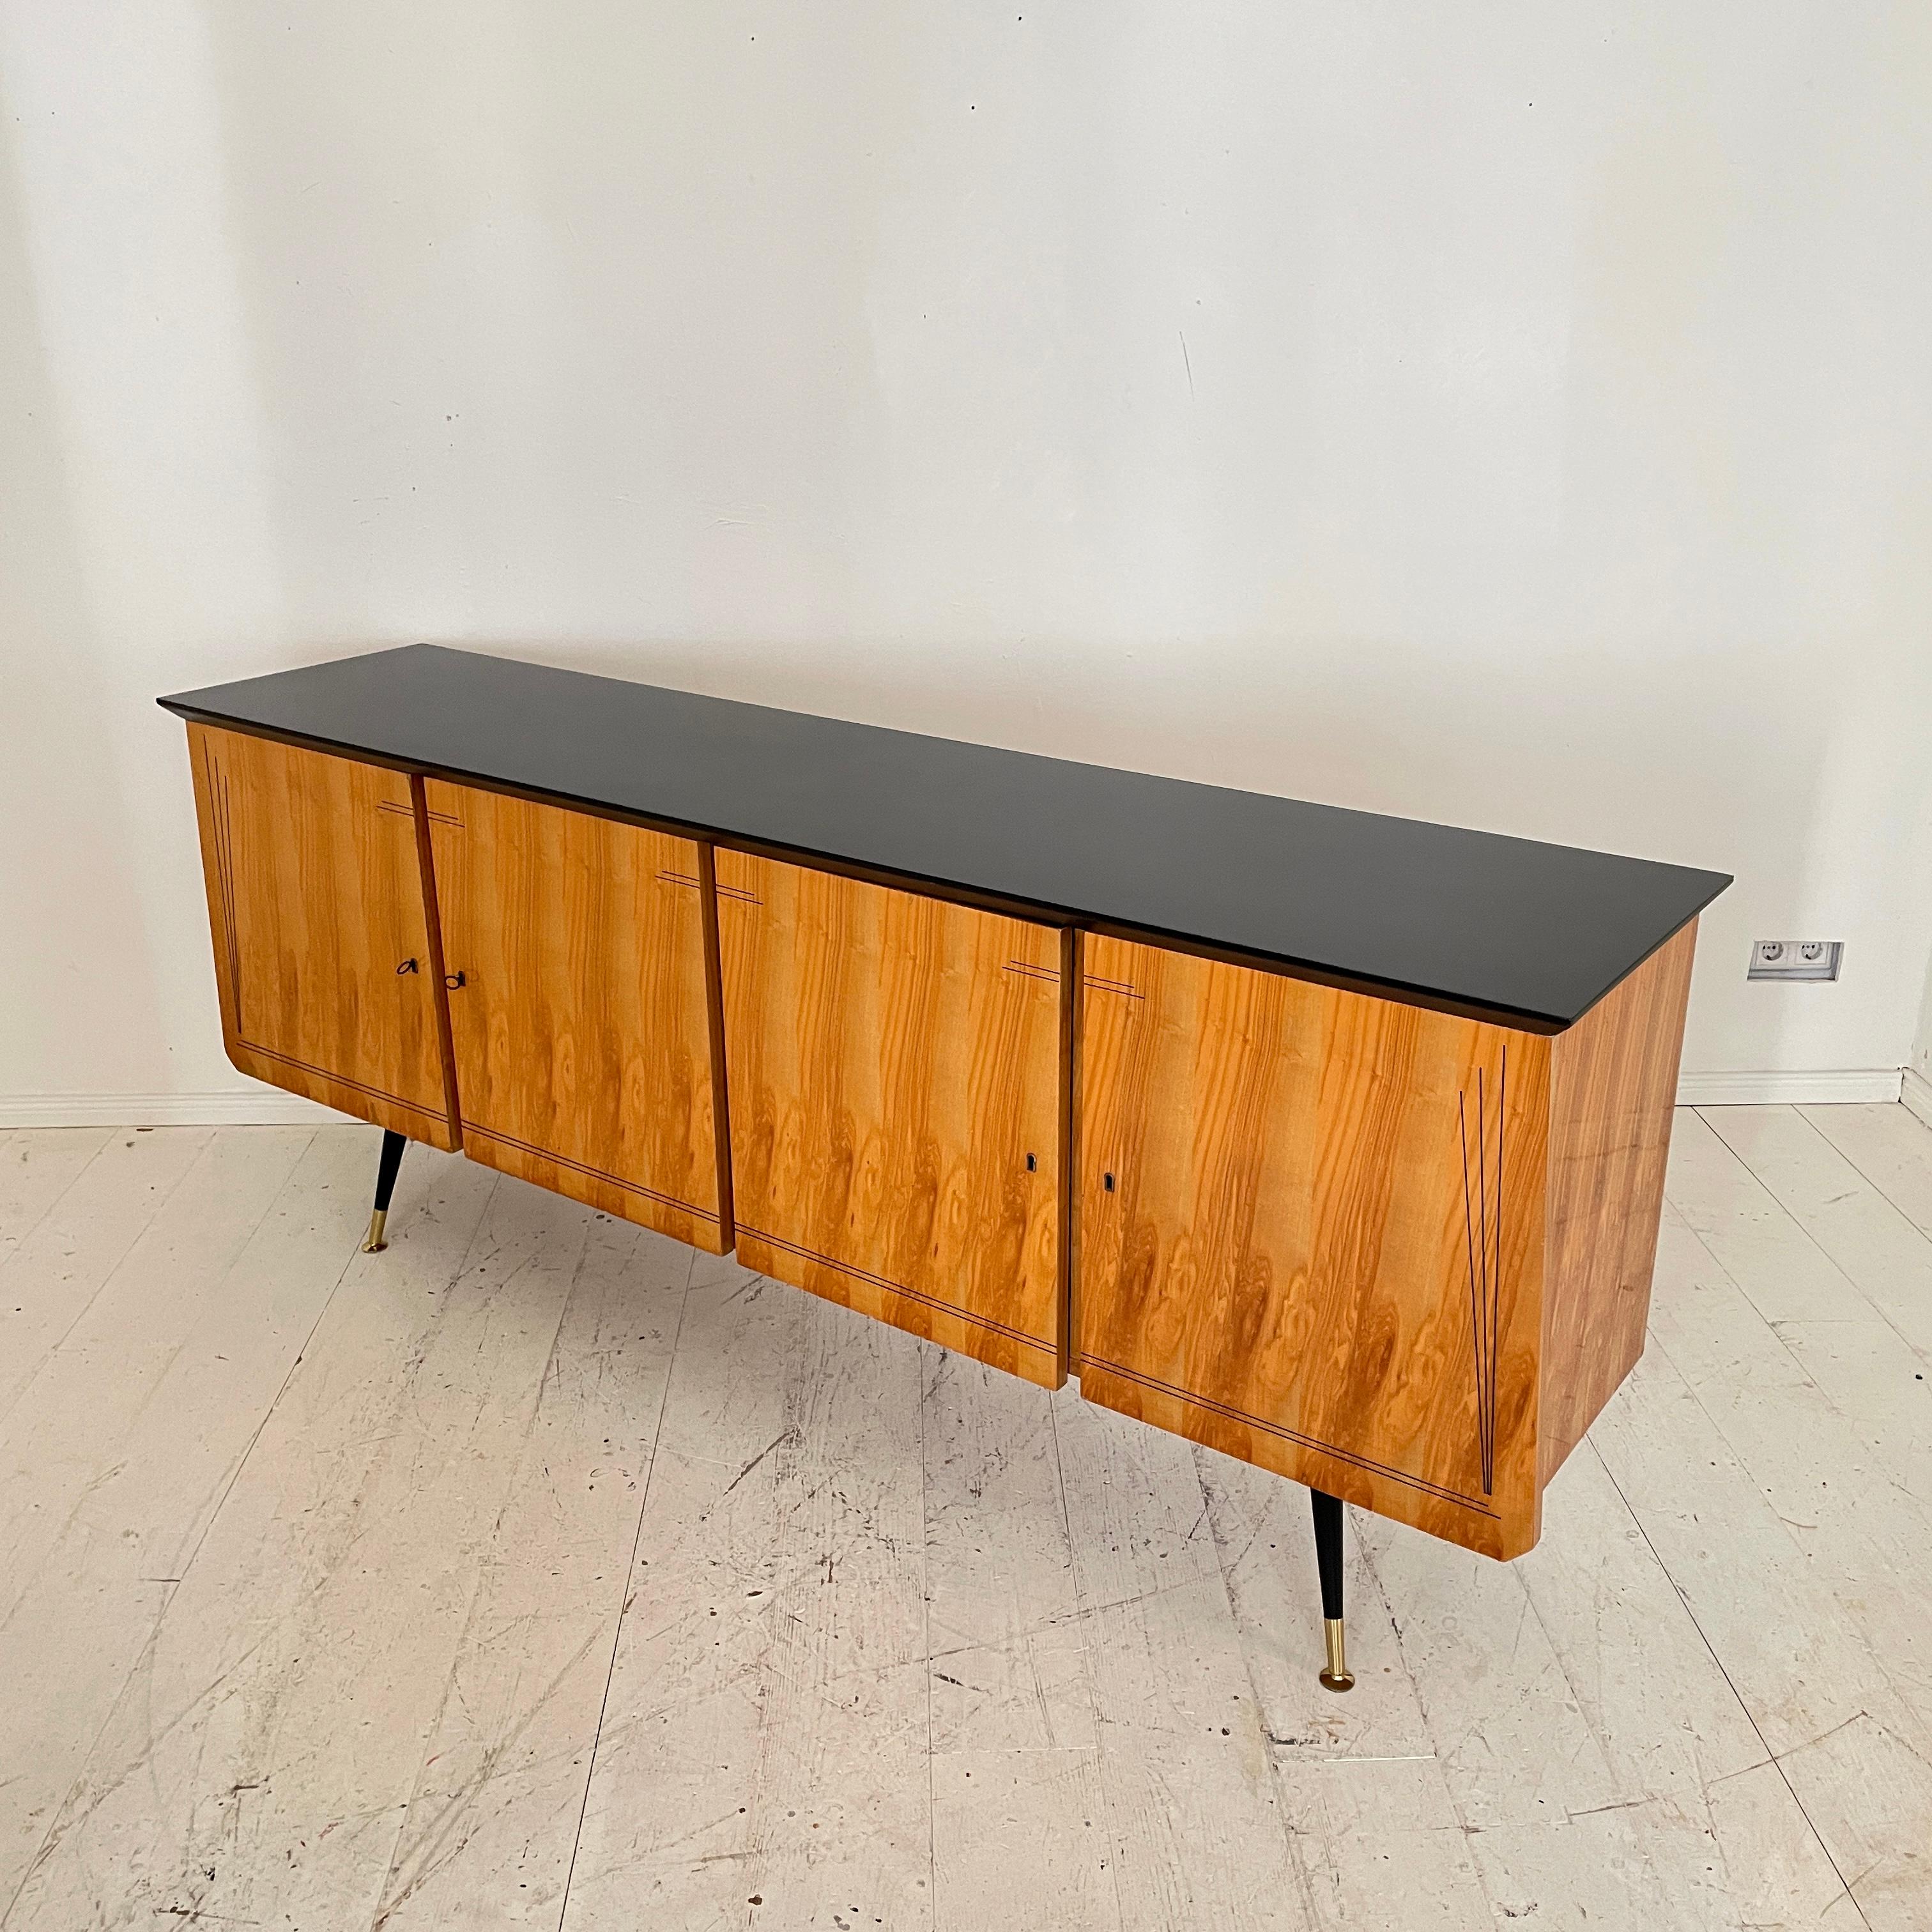 Italian Midcentury Sideboard with 4 Doors in Ash, Black and Brass, Around 1950 For Sale 2